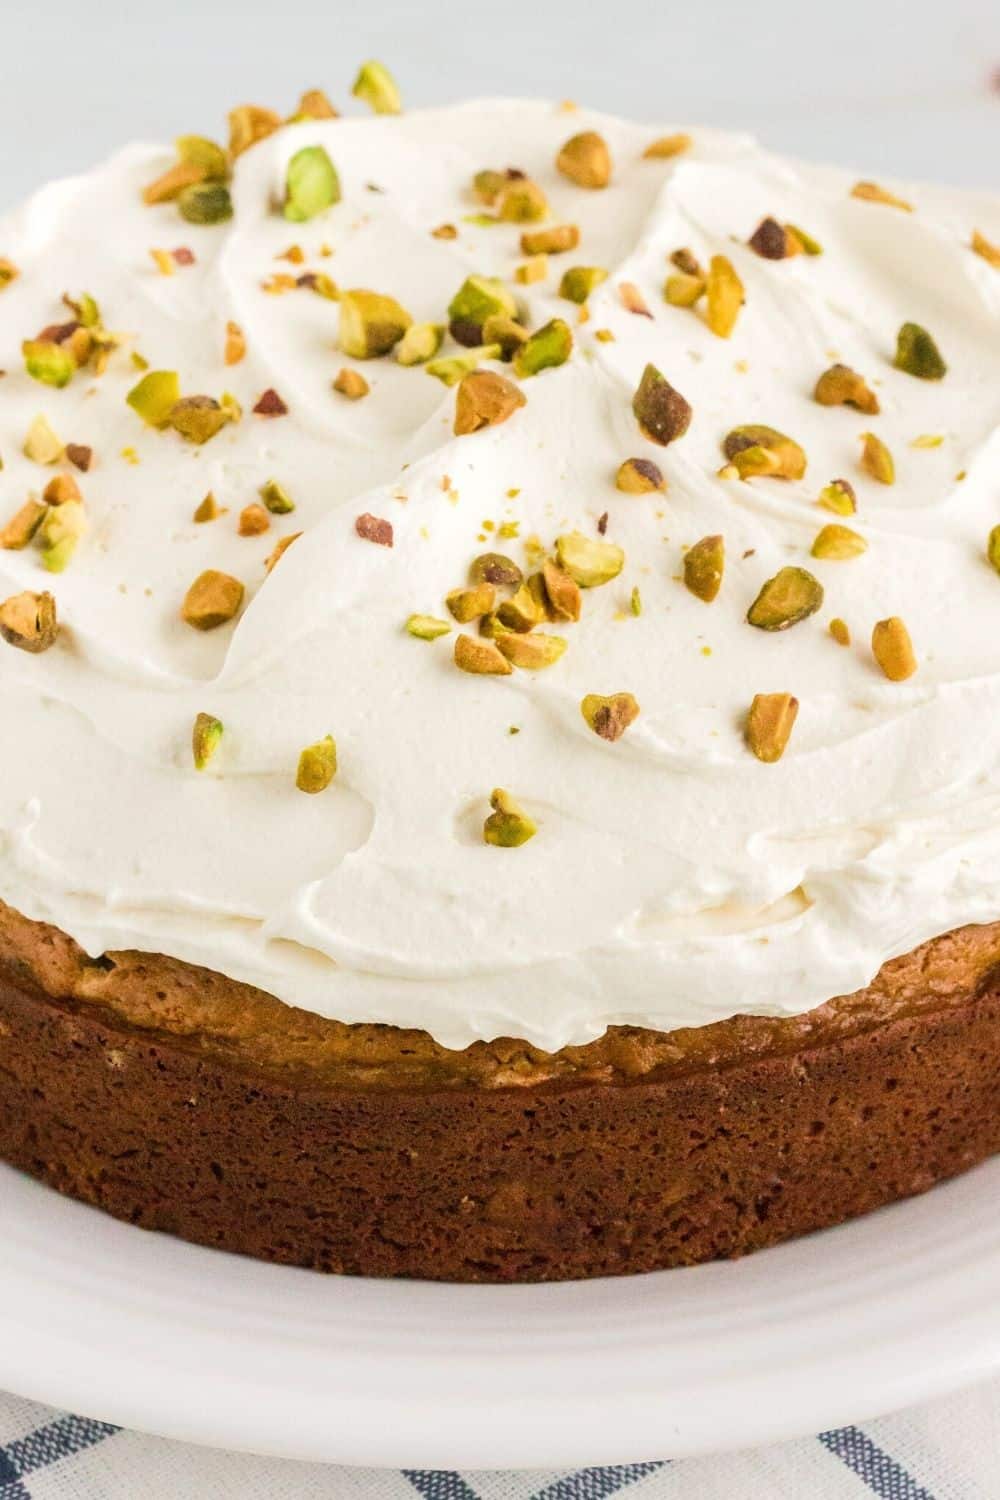 close-up view of mascarpone frosting spread on the top of a homemade pistachio cake, topped with chopped pistachio nuts.